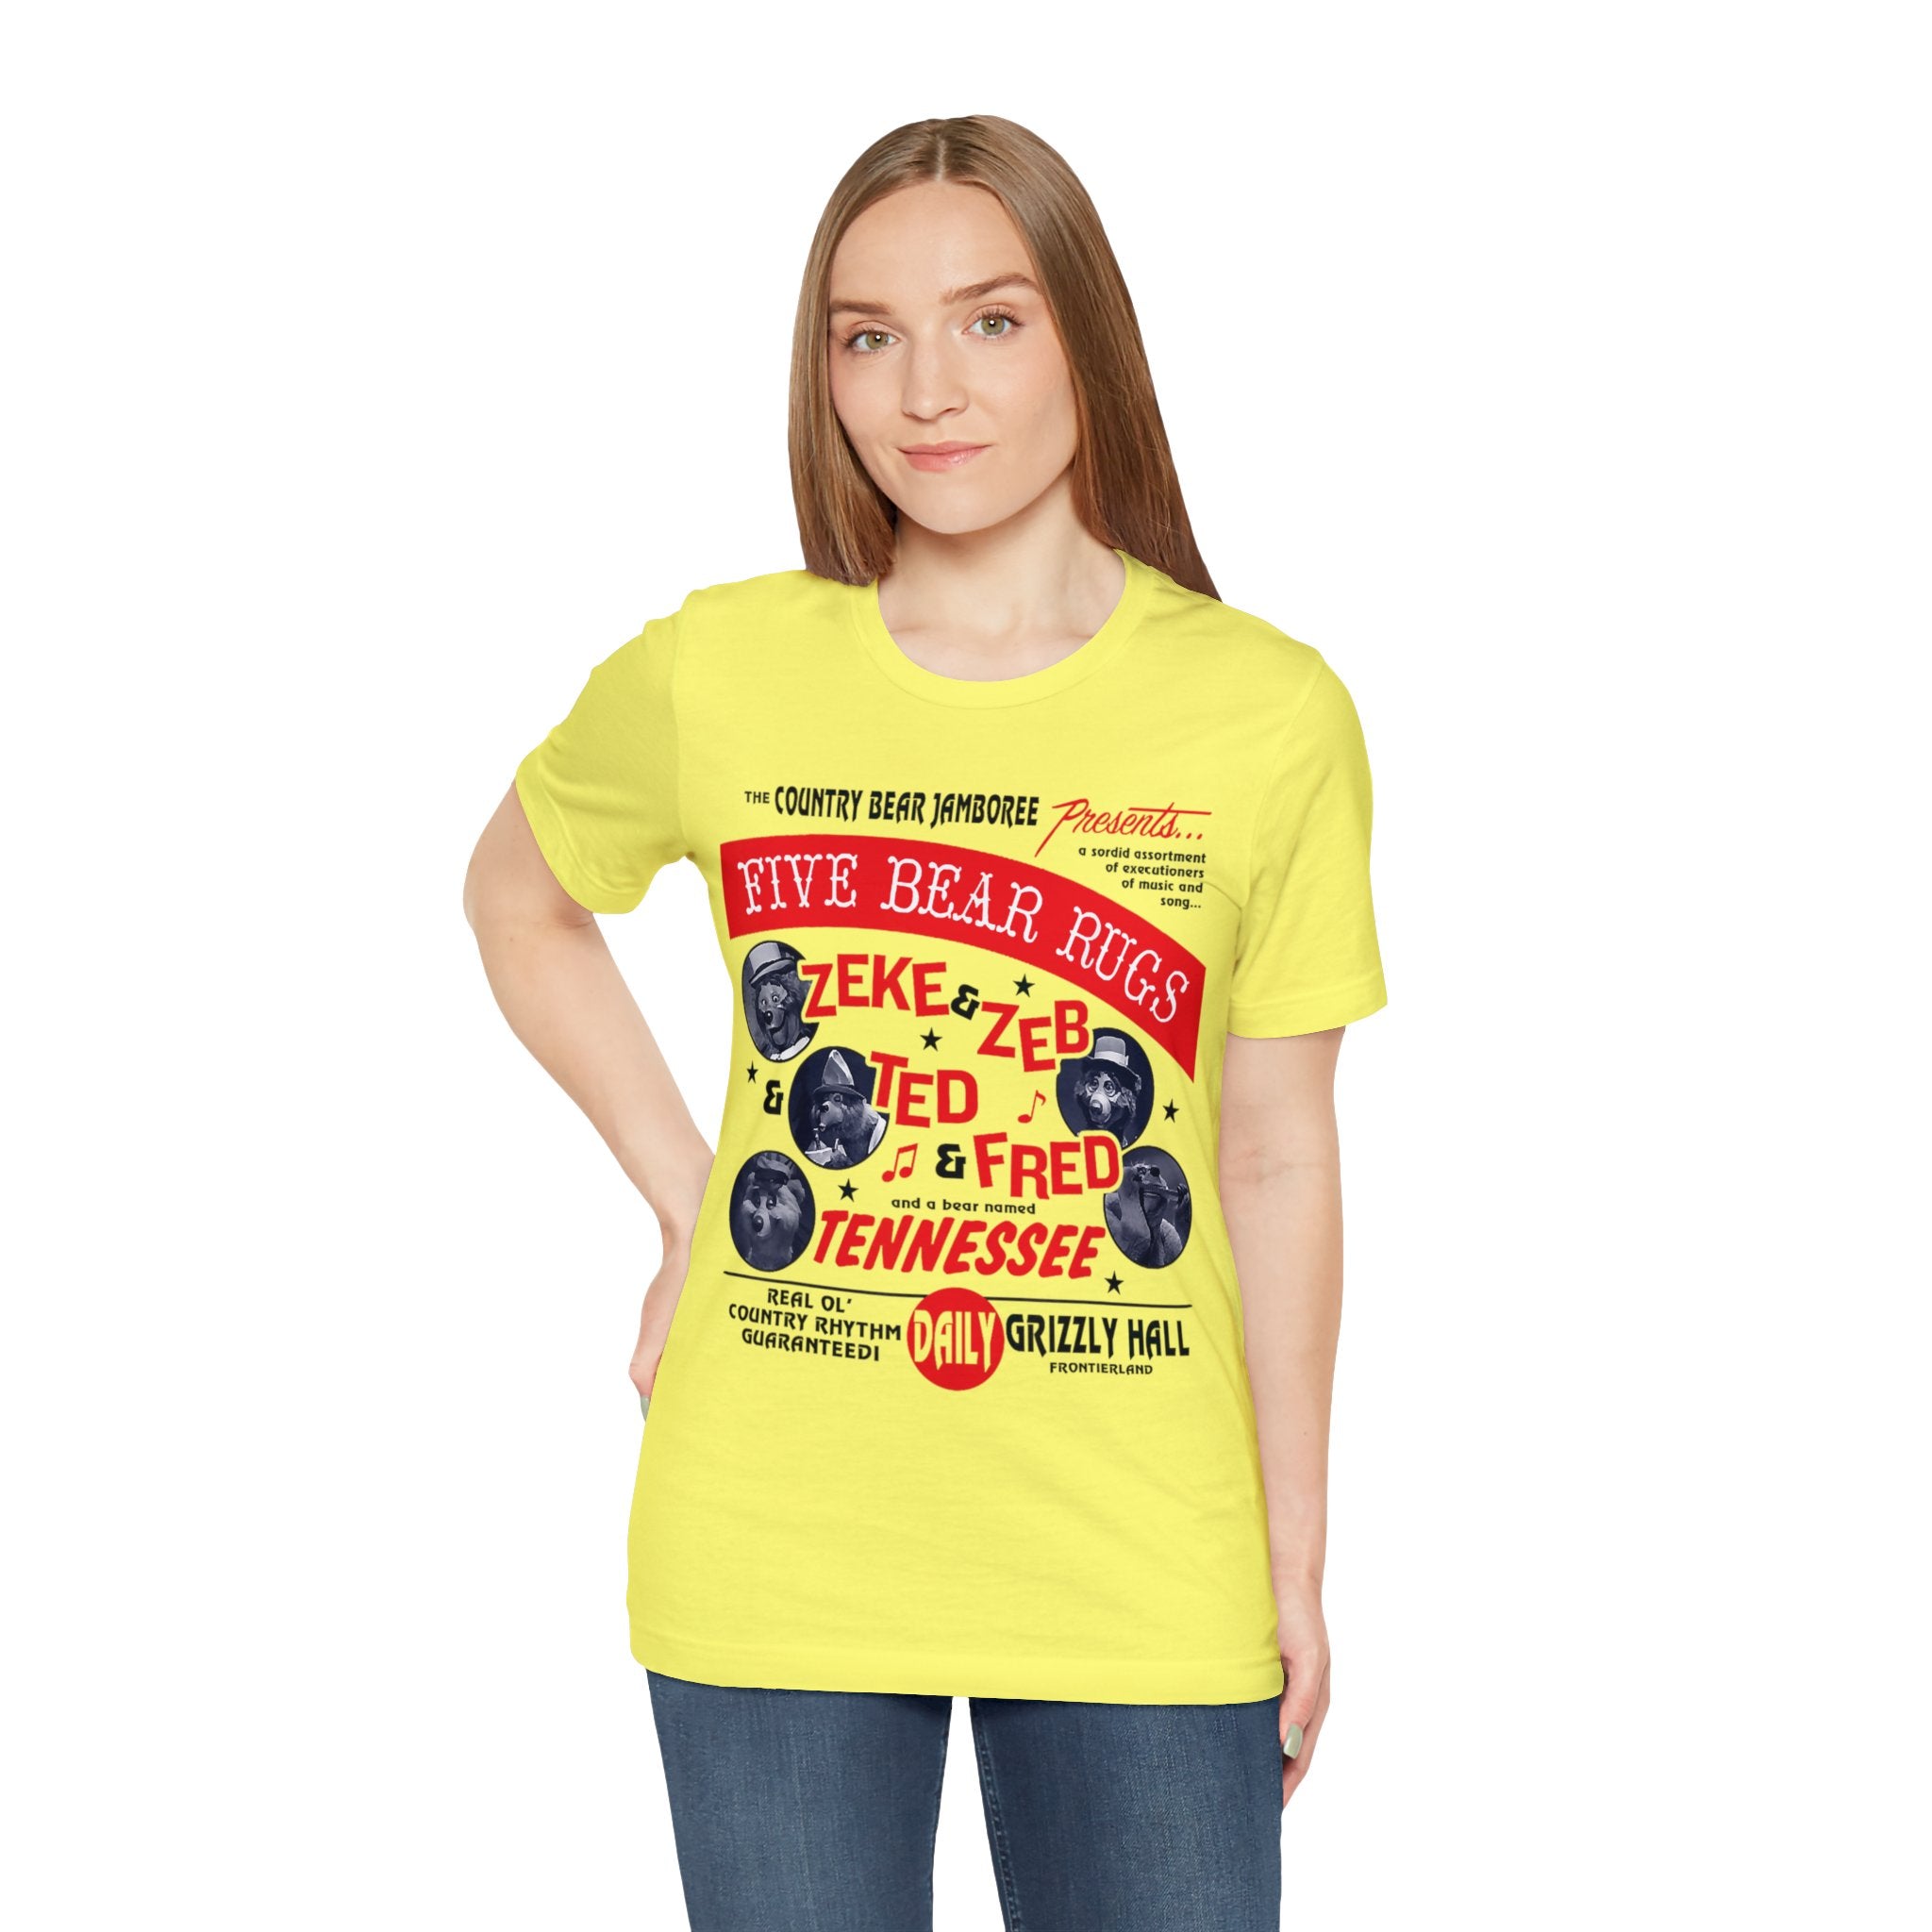 A woman sporting a yellow Country Bear Jamboree Real Old Country Rhythm Five Bear Rugs Tee-Shirt with the words "tennessee tennessee tennessee" written across it.